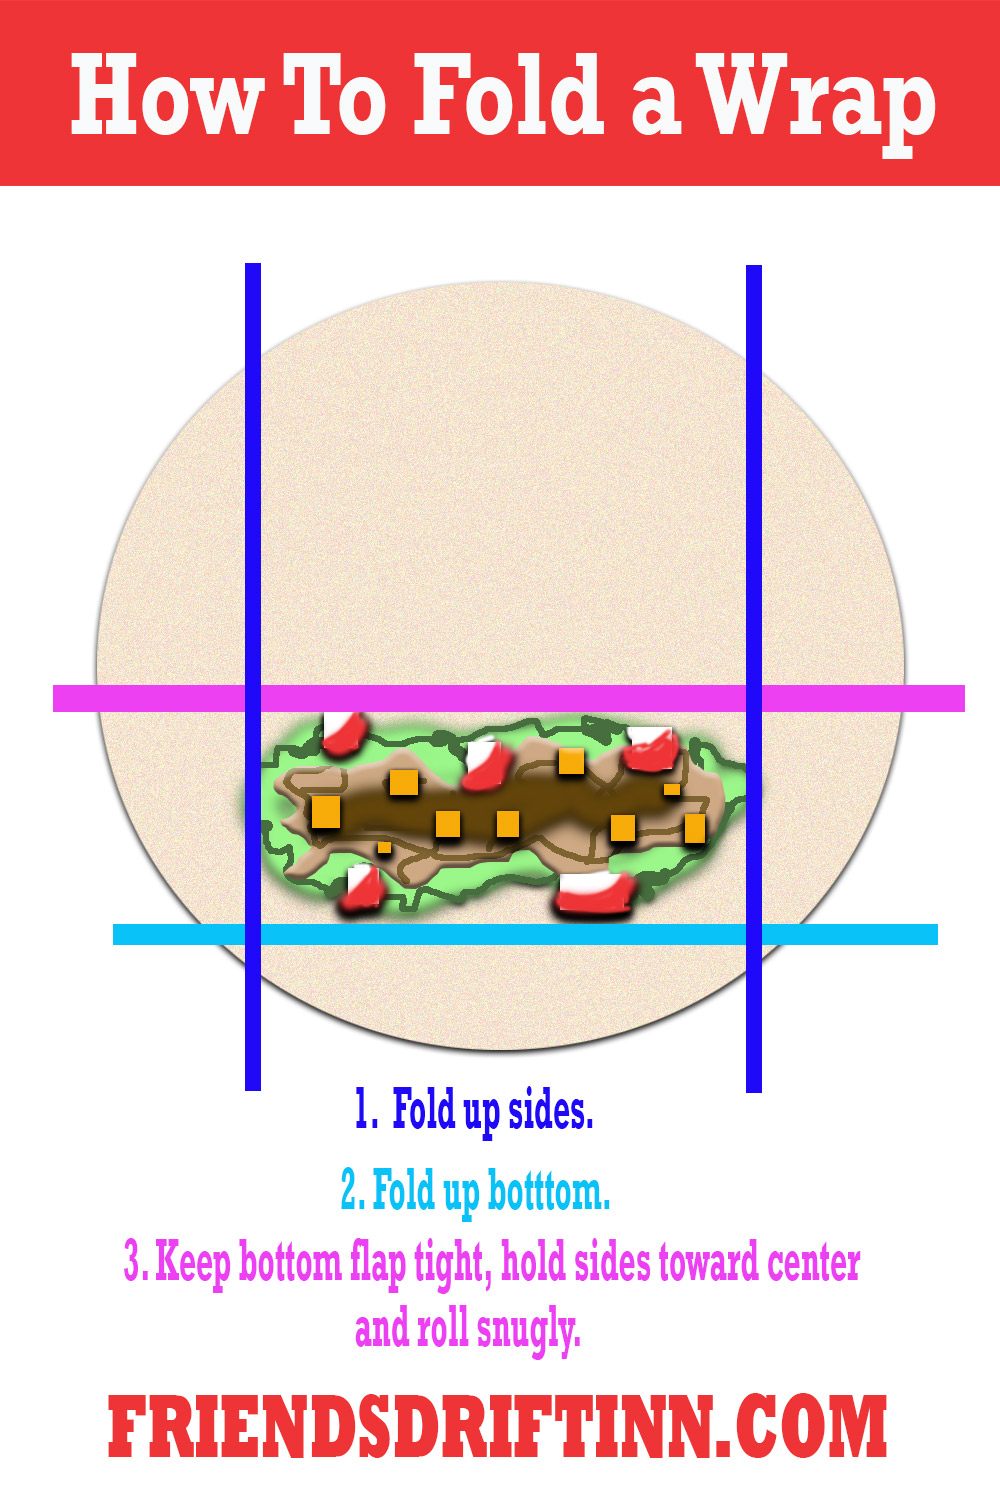 Infographic showing grid over tortilla wrap to illustrate how to fold wrap.